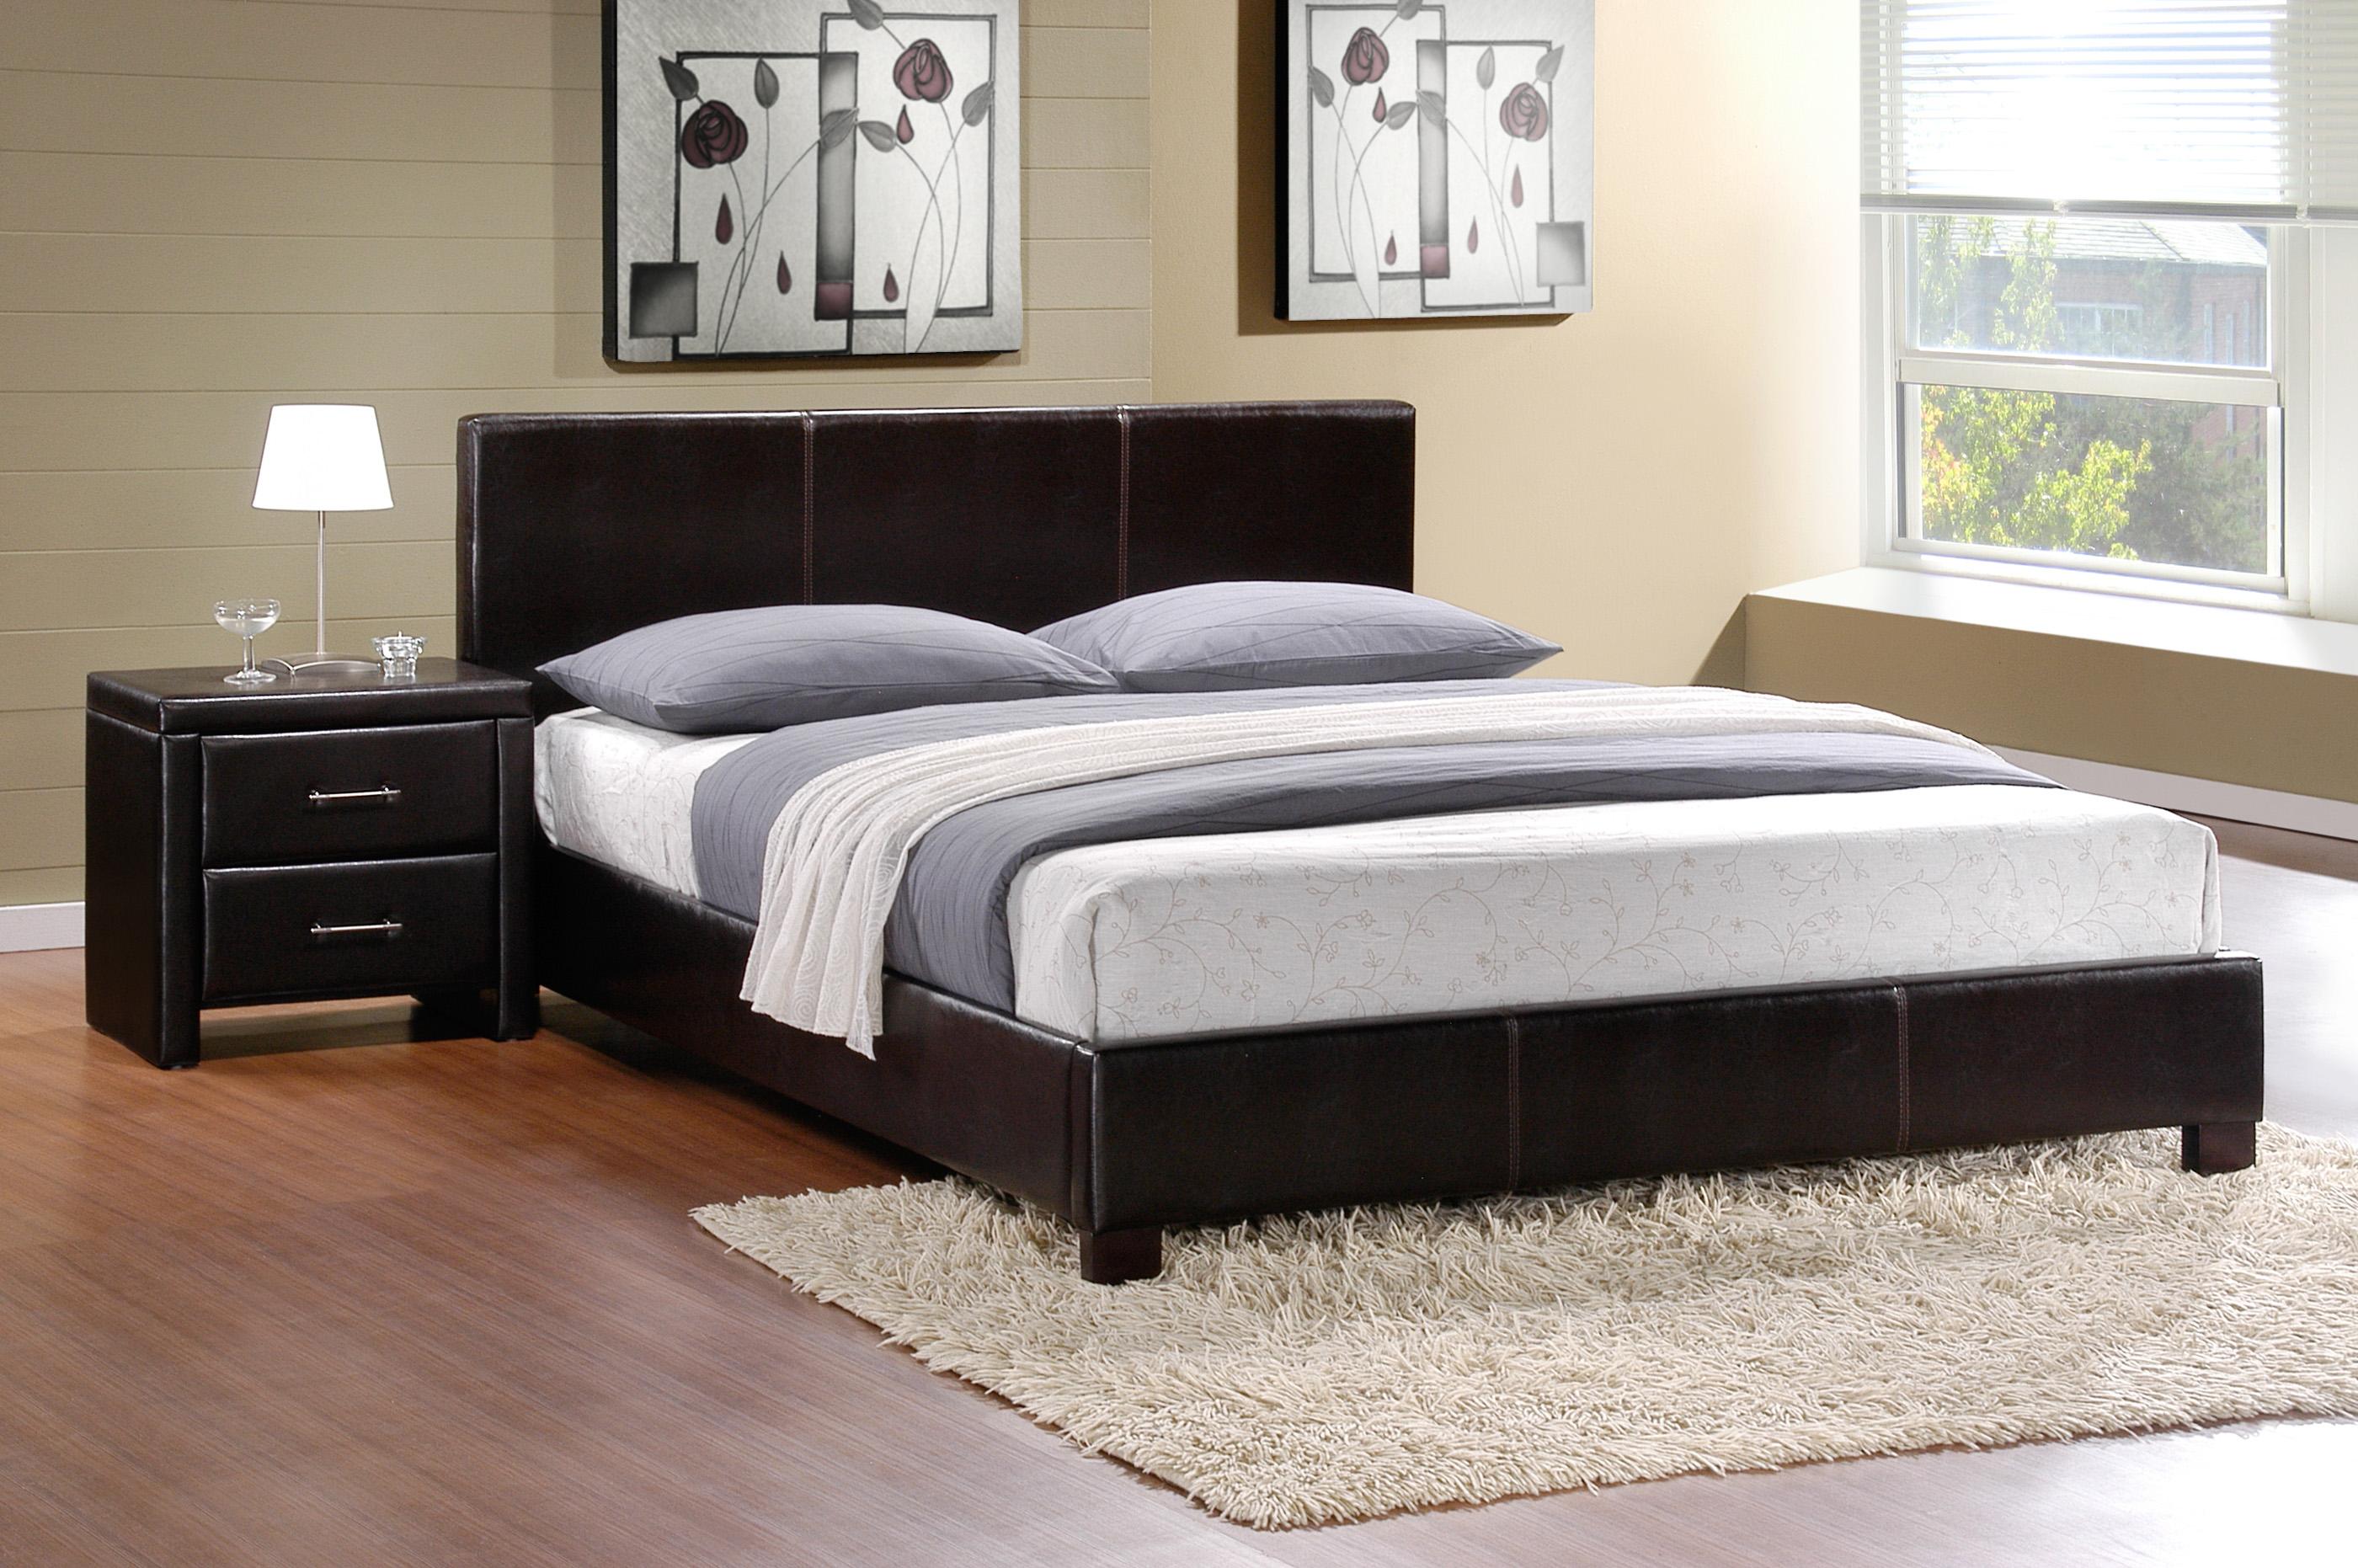 Transitional Bedroom Set 5790F-1-3PC Zoey 5790F-1-3PC in Dark Brown Faux Leather